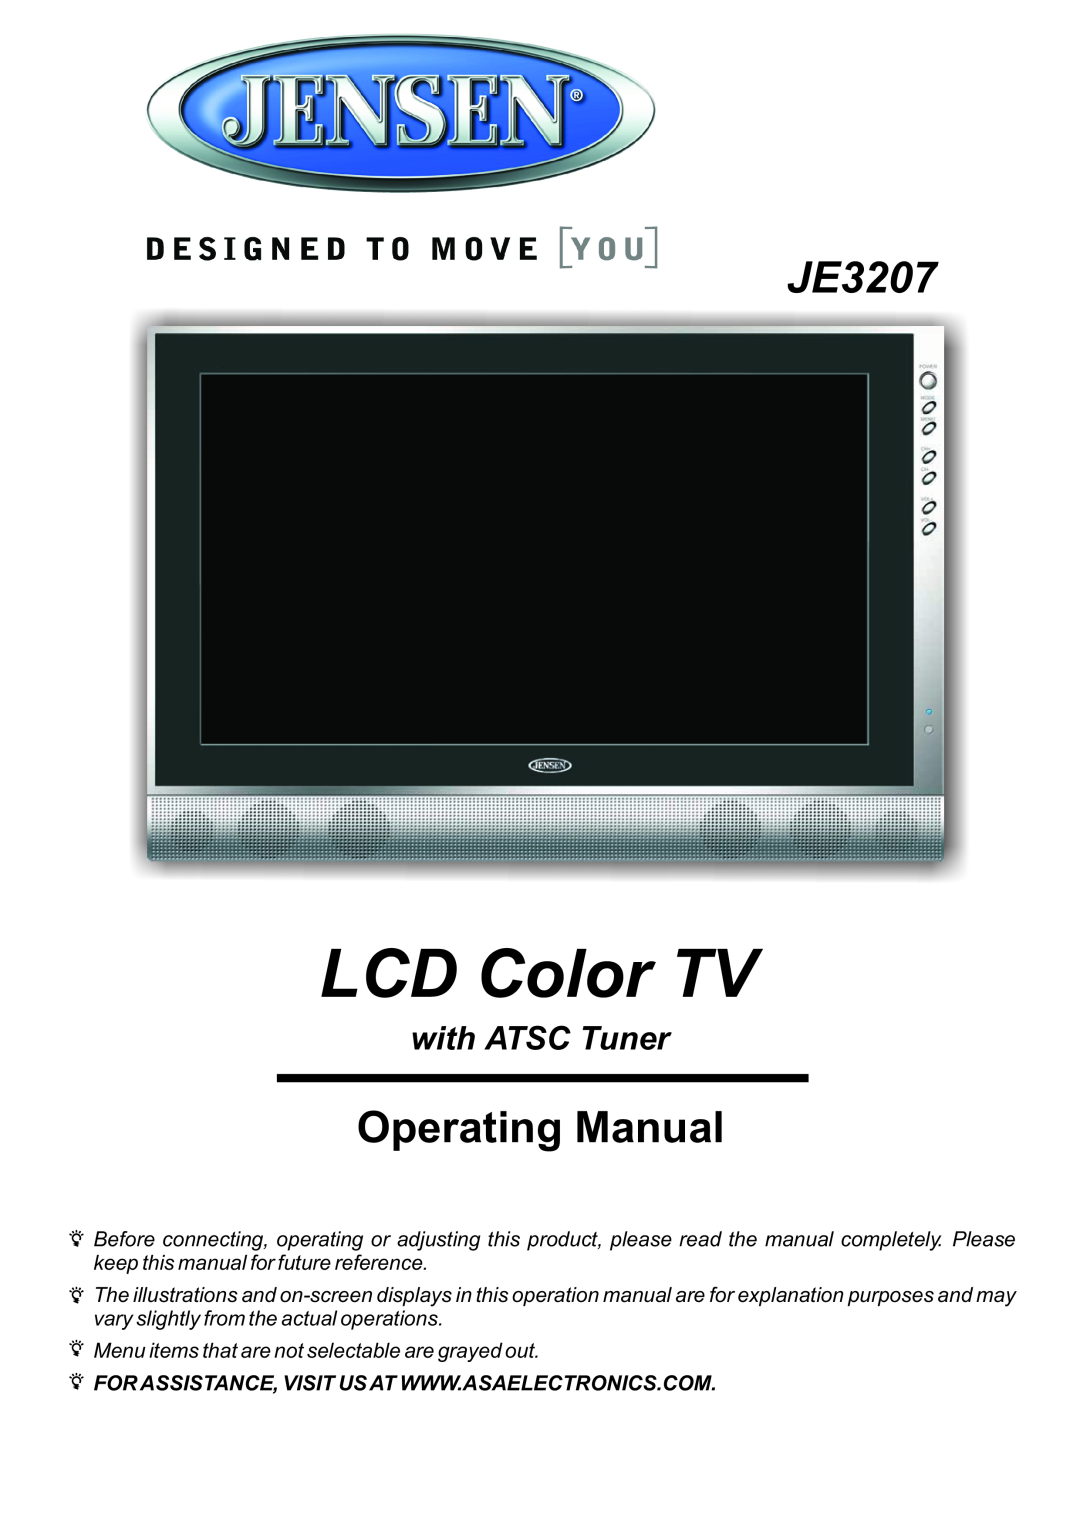 Jensen JE3207 operation manual LCD Color TV, Operating Manual, with ATSC Tuner 